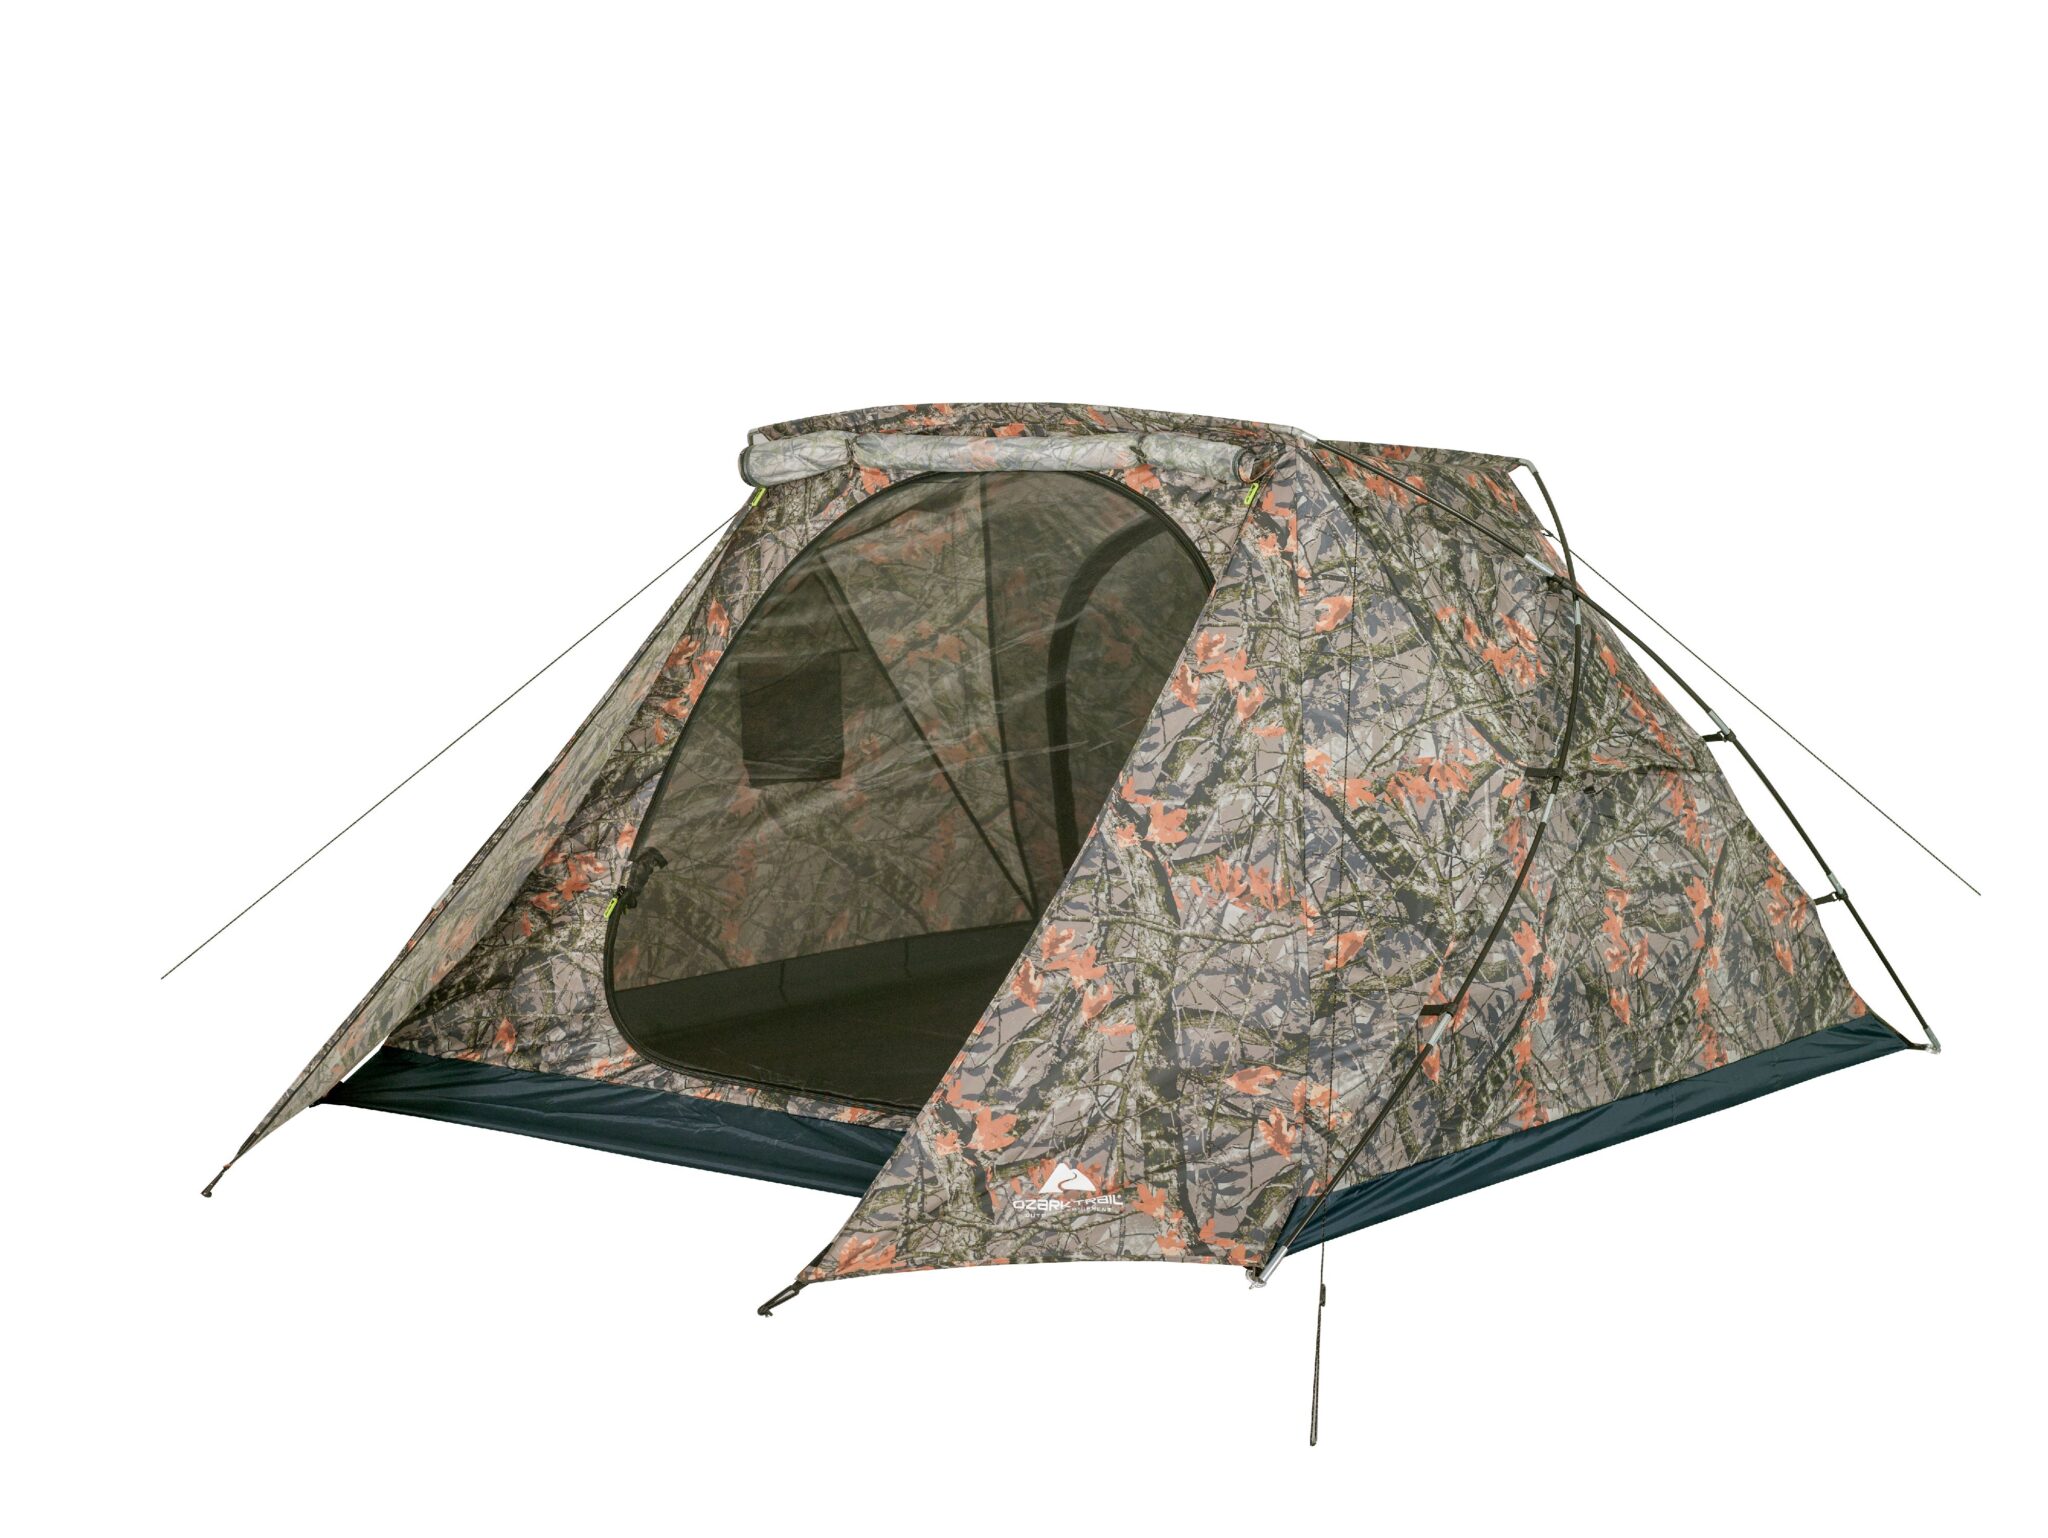 Ozark Trail 3-Person Camping Tent ONLY $30.67 (Reg $65)